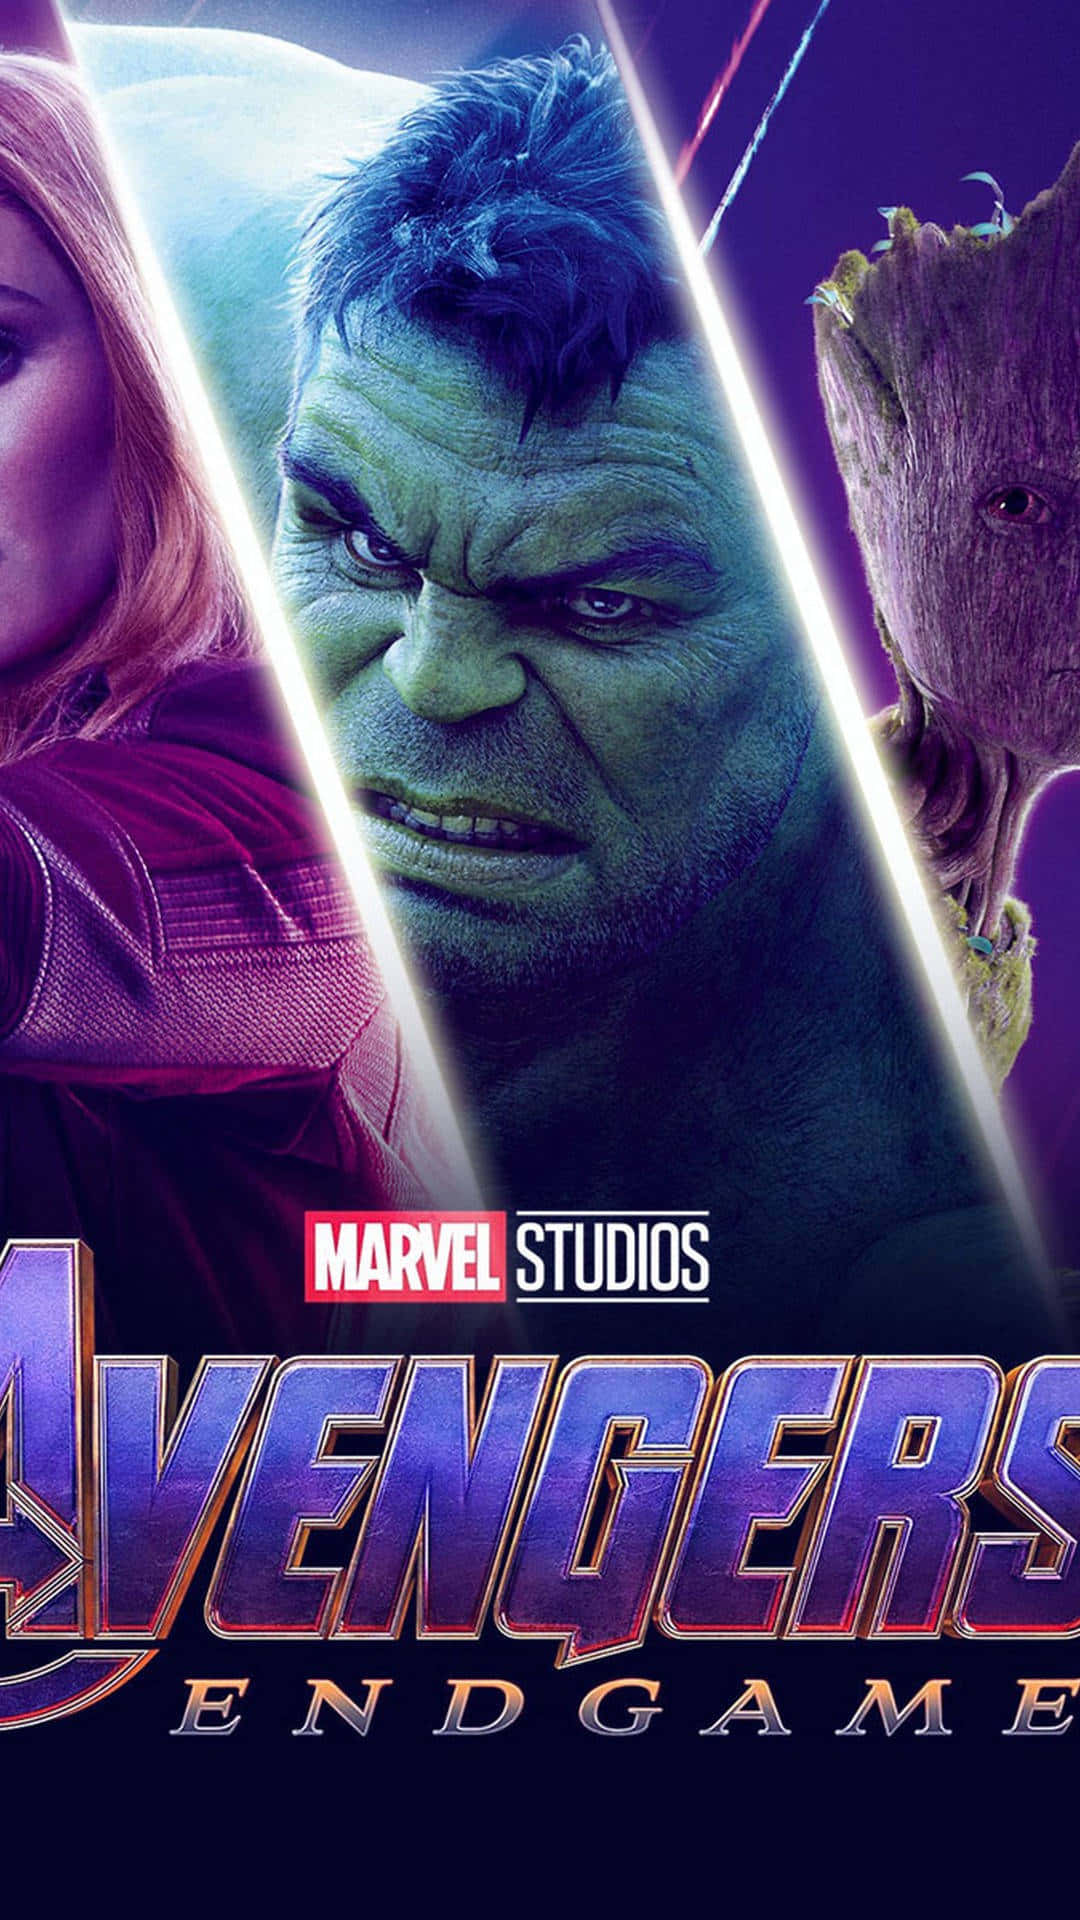 Get Ready For Avengers Endgame With An Incredible Iphone Wallpaper